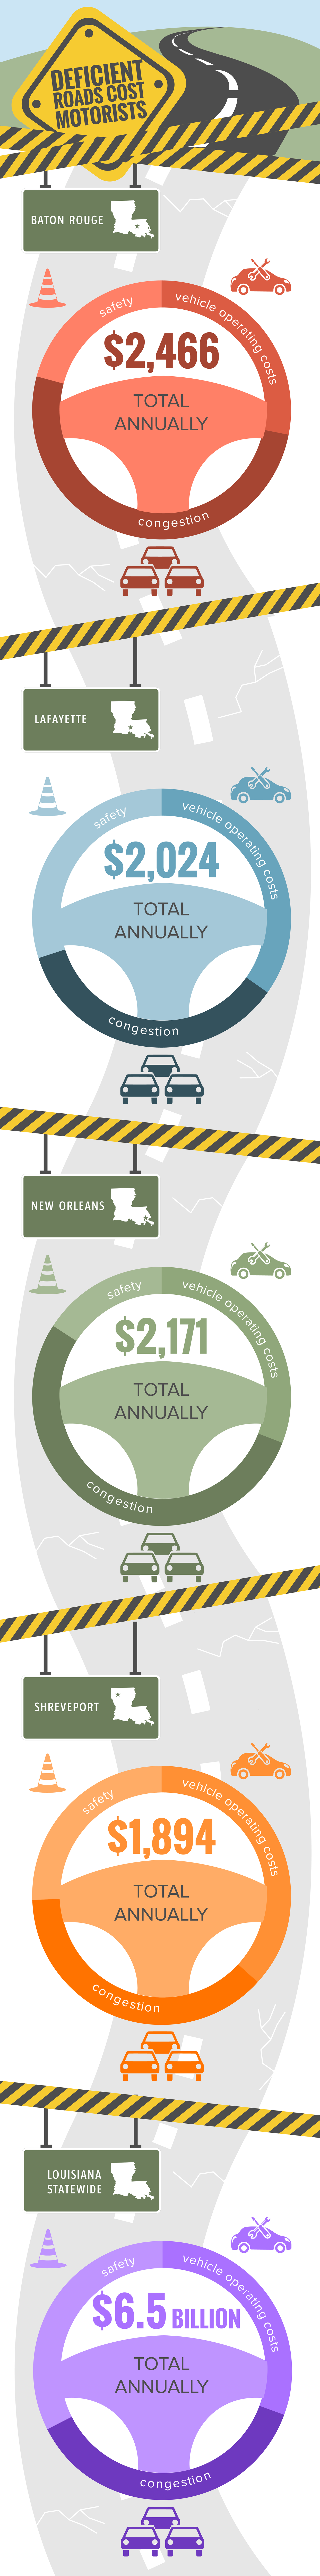 Louisiana Deficient Roads Infographic By Locality